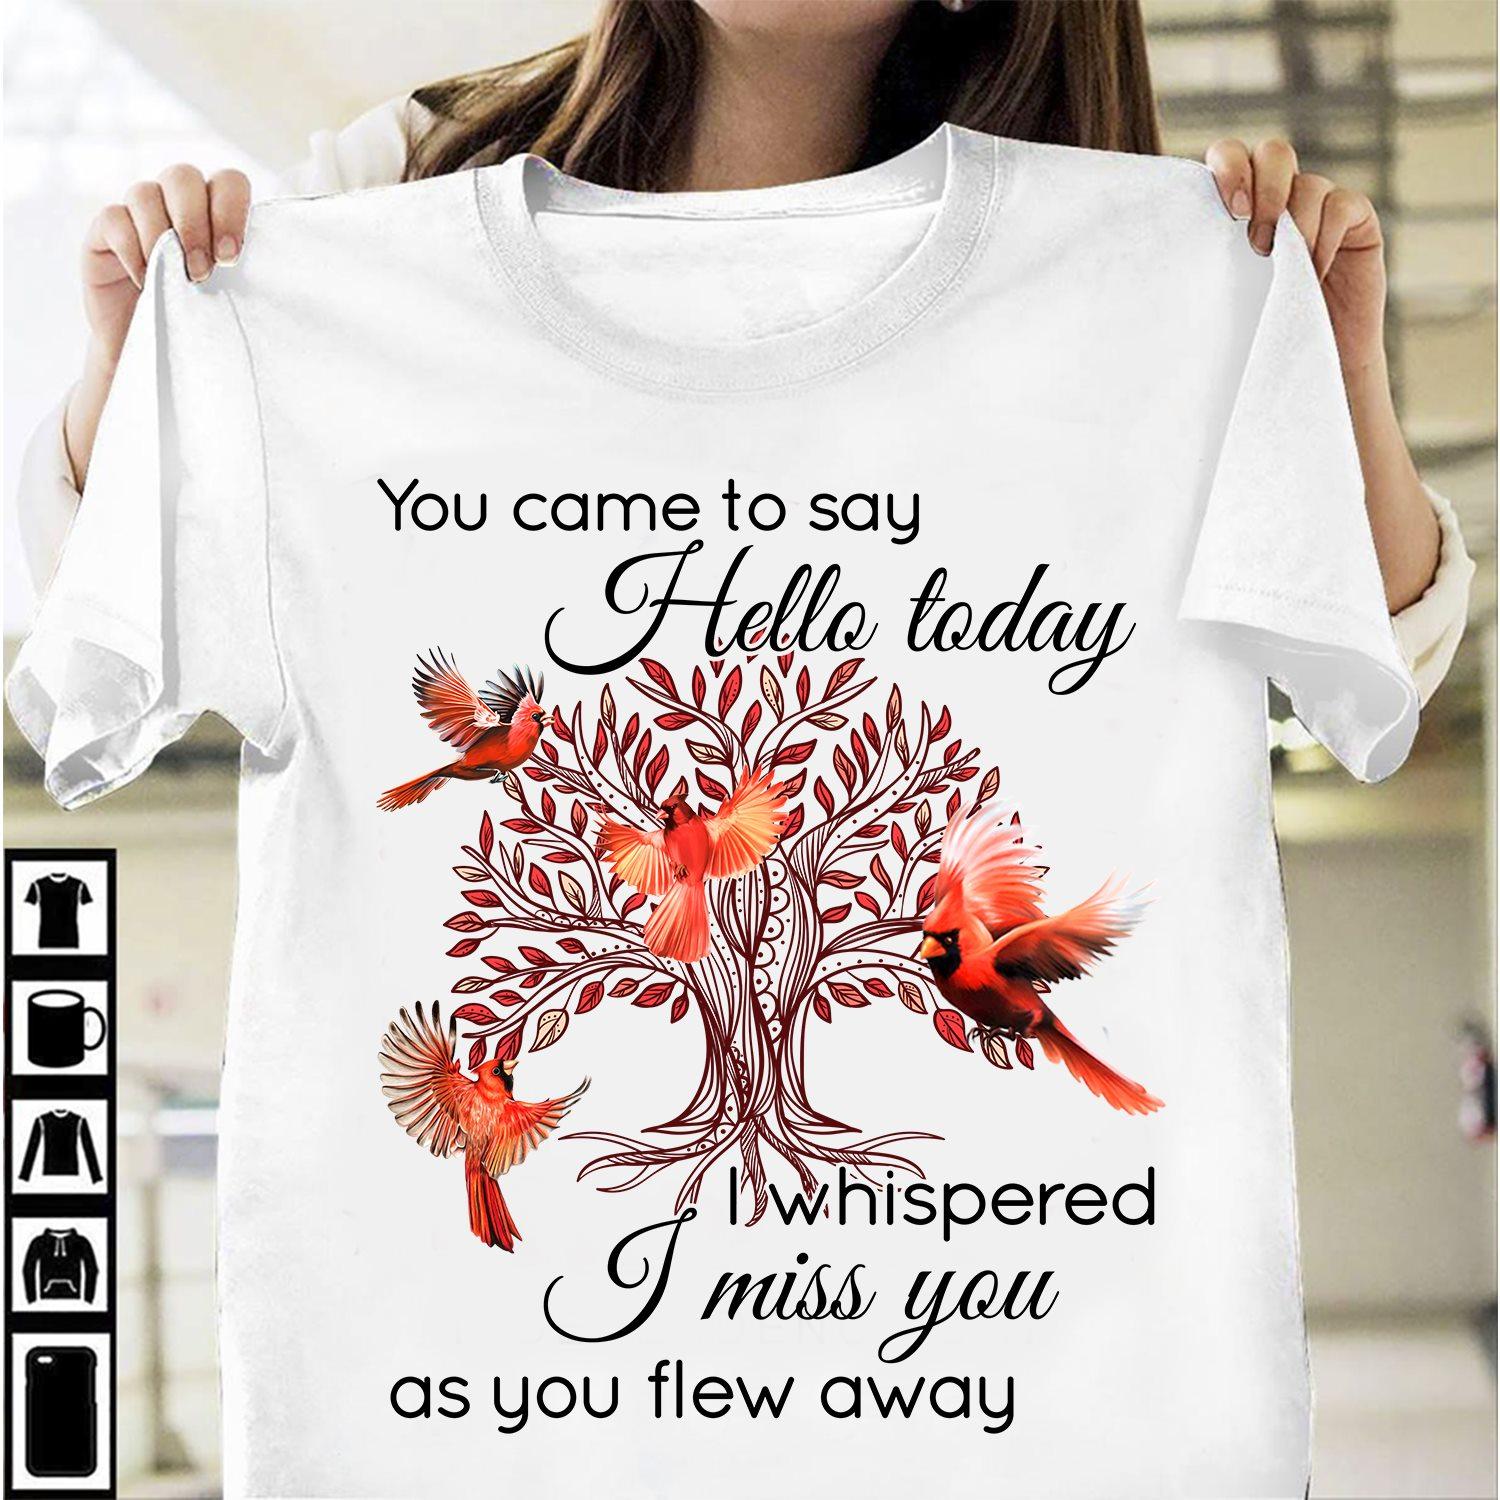 Oost Fotoelektrisch dutje Northern Cardinal - You came to say hello today i whispered i miss you as  you flew away Shirt, Hoodie, Sweatshirt - FridayStuff